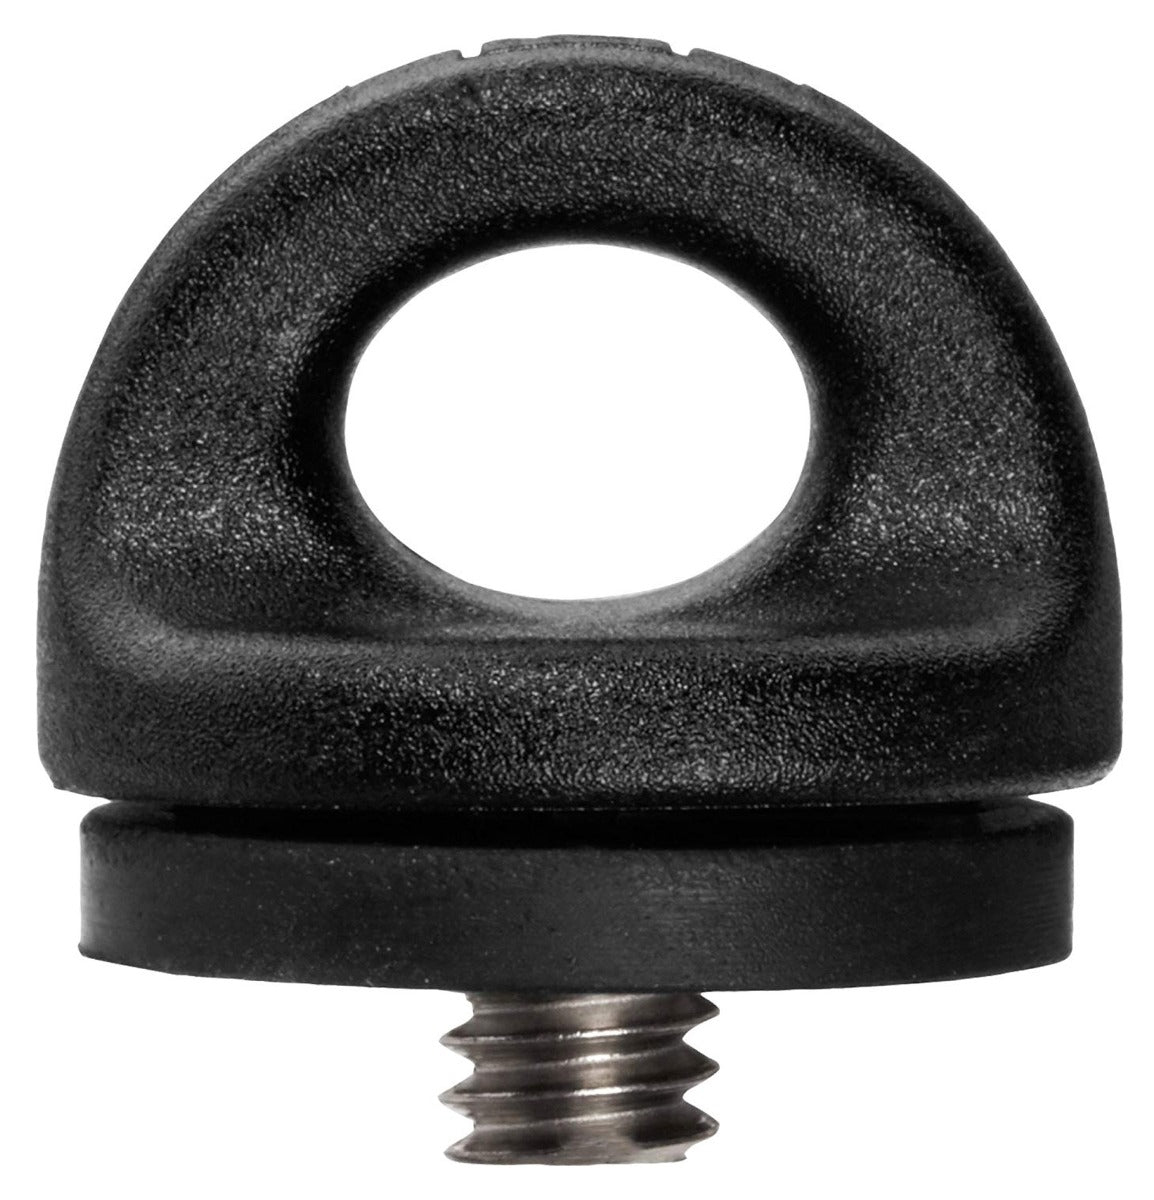 Product Image of Blackrapid Fastenr FR-5 Breathe - For Connecting to Tripod Mount